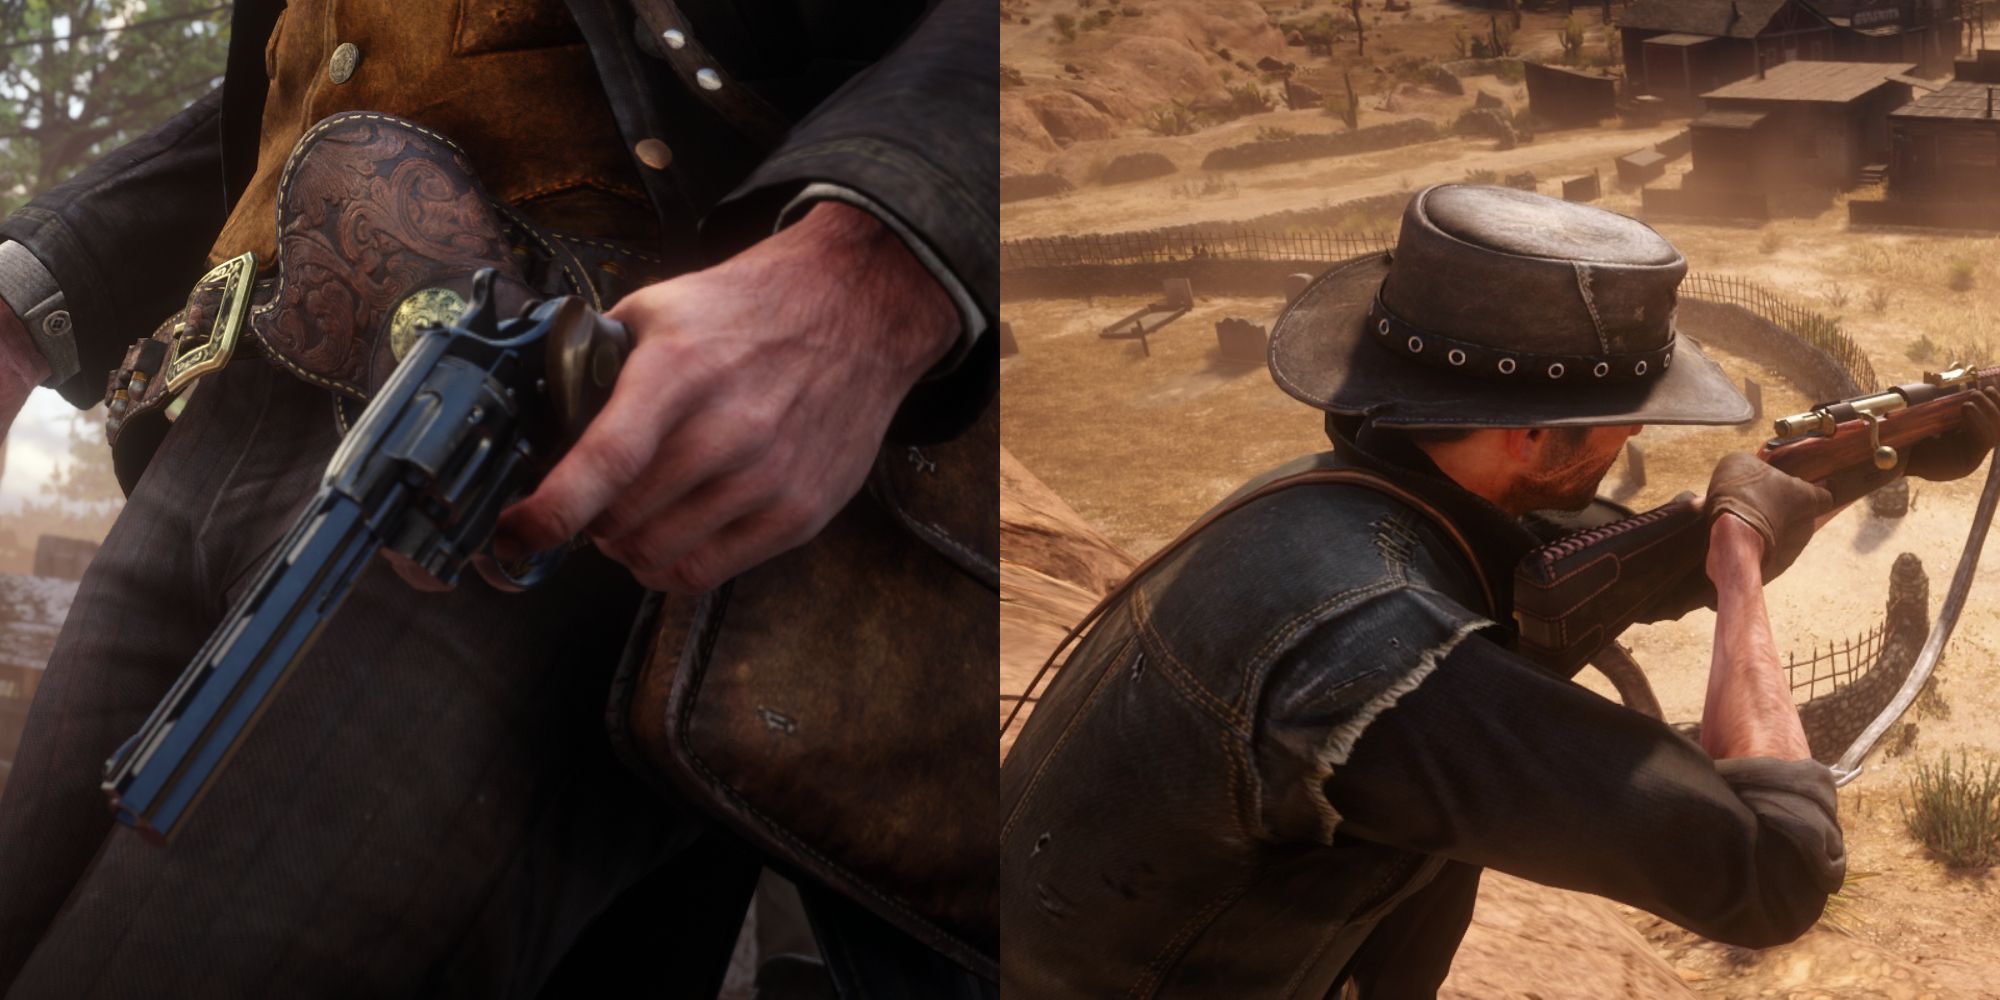 30 Hidden Locations And Weapons In Red Dead Redemption 2 (And Where To Find  Them)